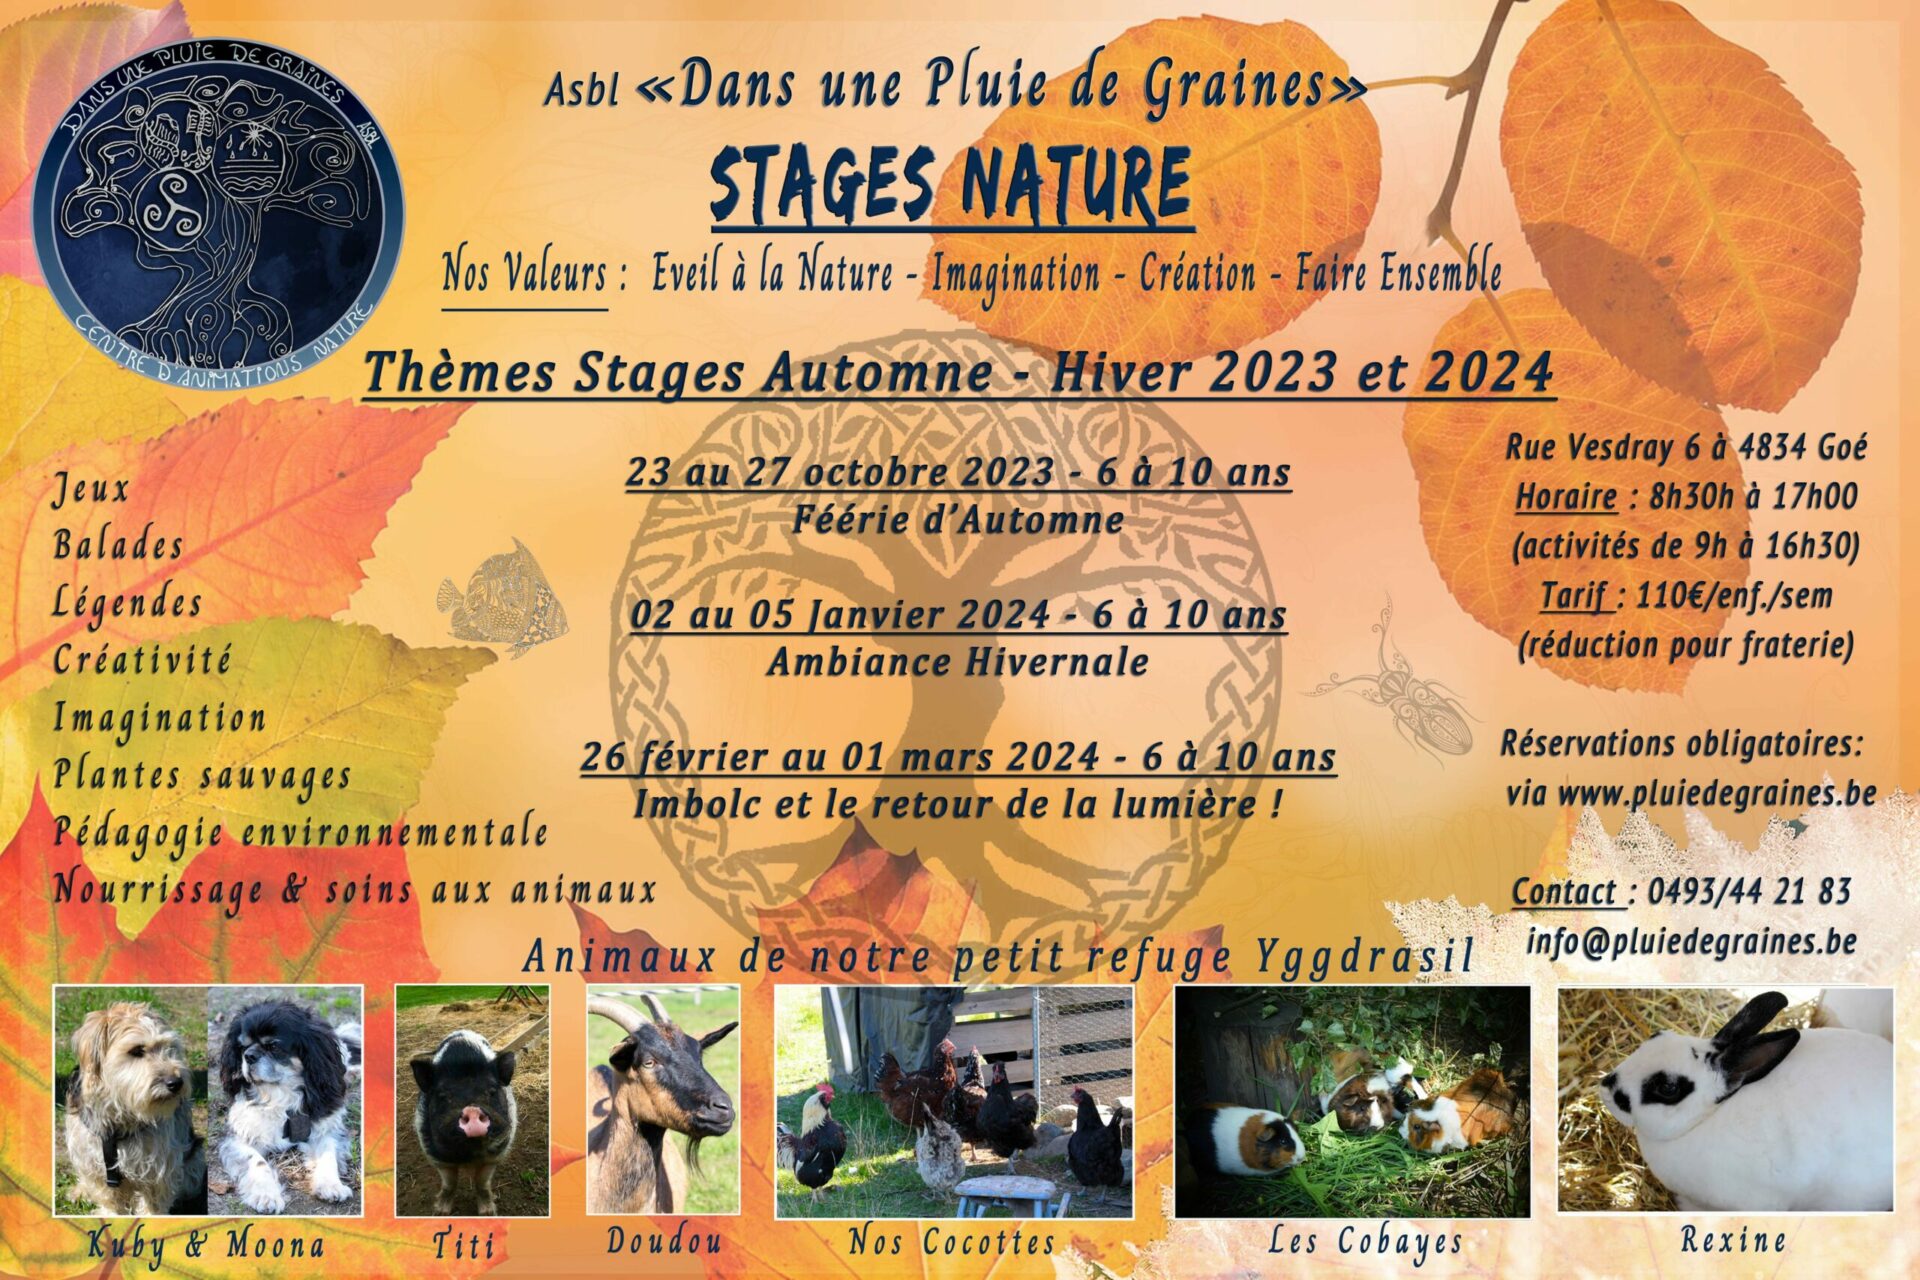 Stage Nature "Ambiance Hivernale"